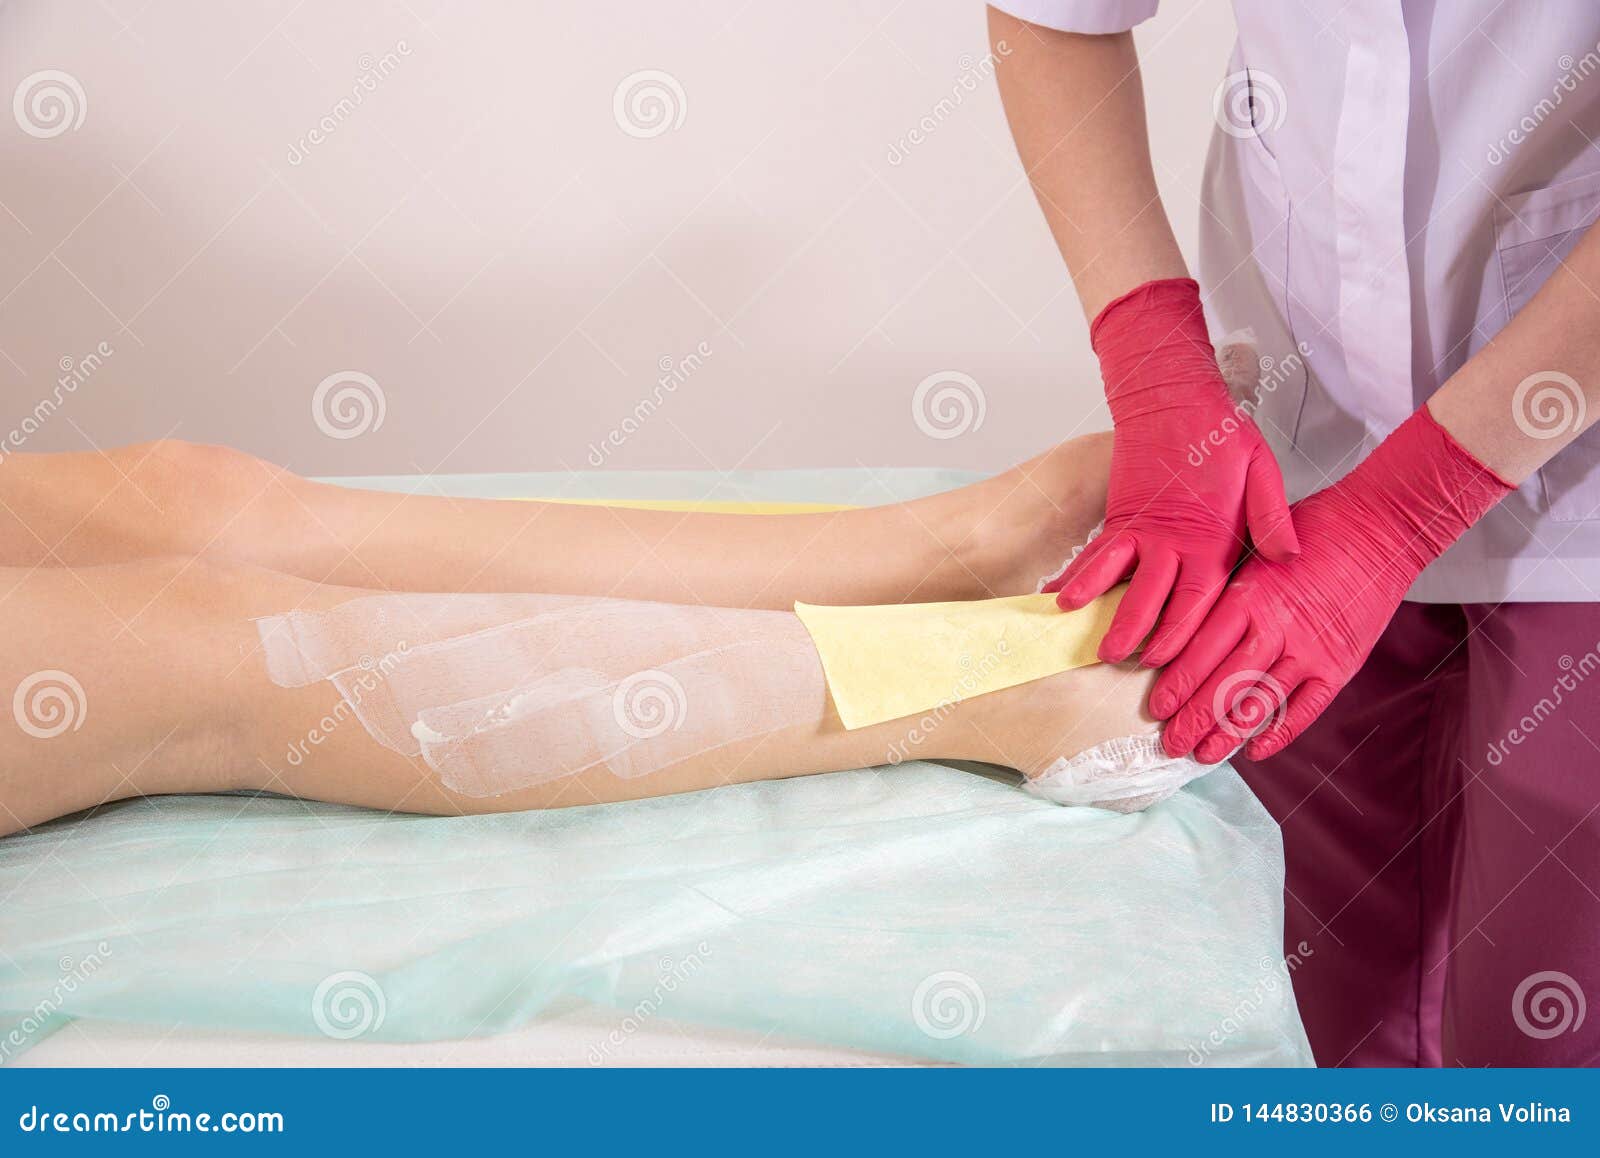 Master In Gloves Makes The Procedure Of Waxing Female Legs Stock Photo